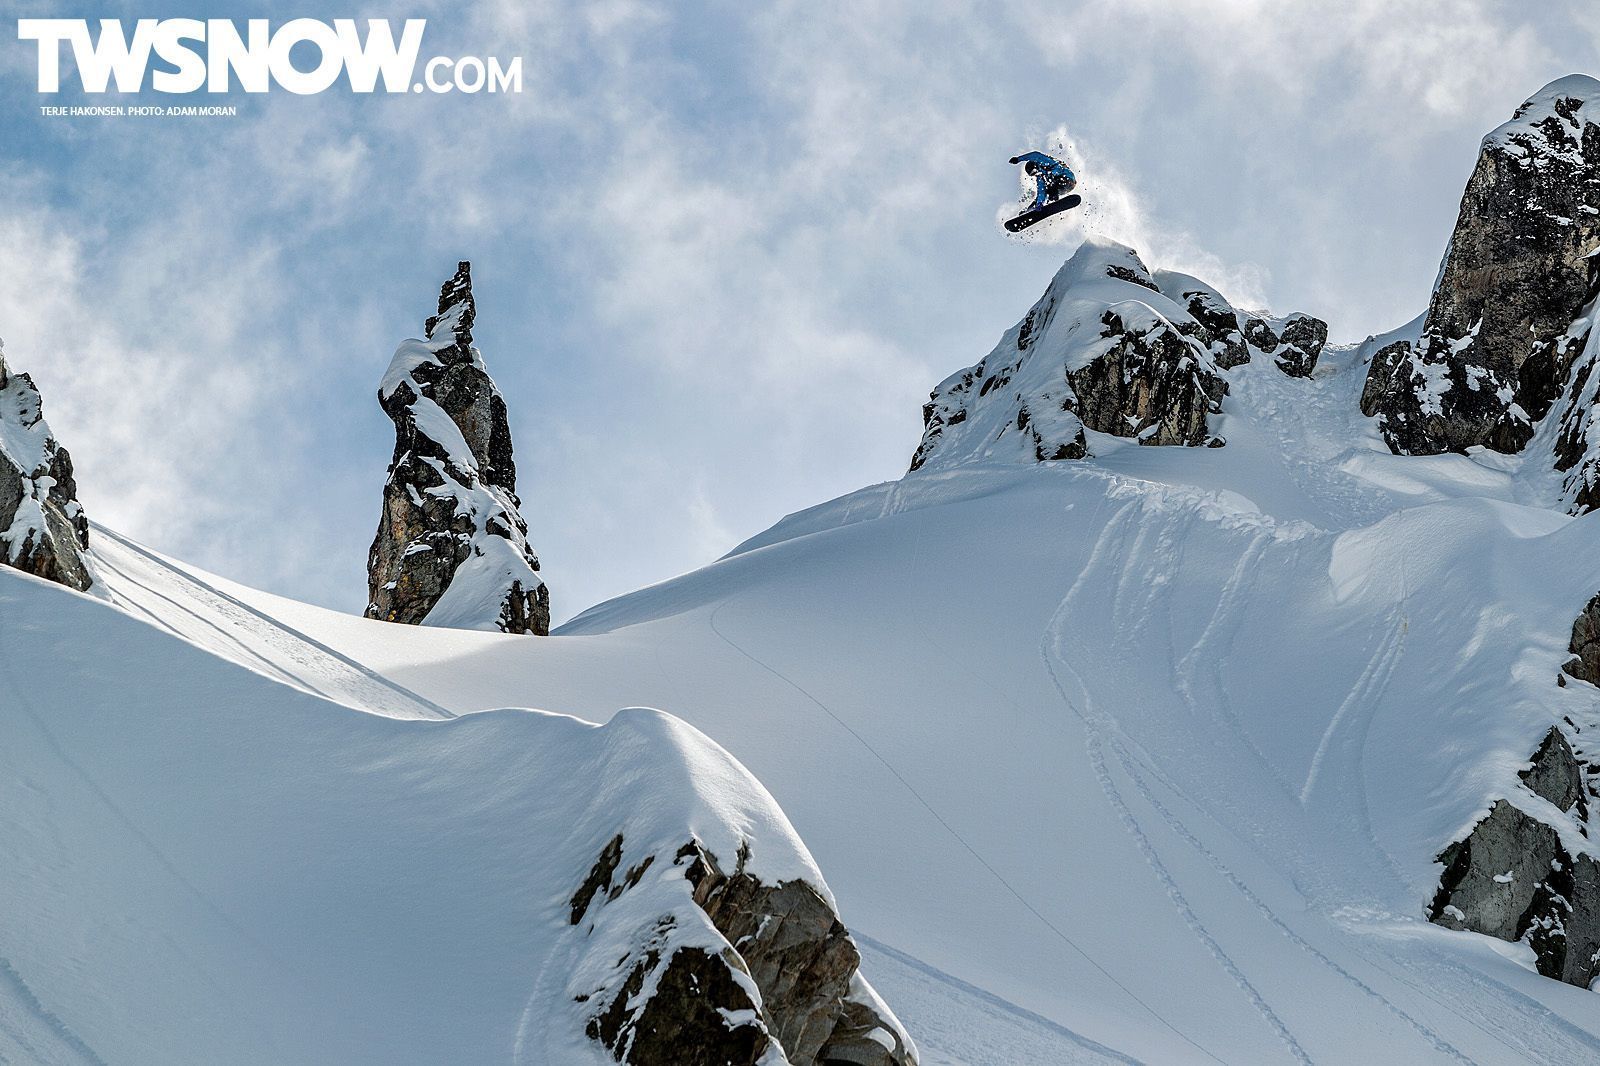 Wallpaper Wednesday: Backcountry Air Time | TransWorld SNOWboarding